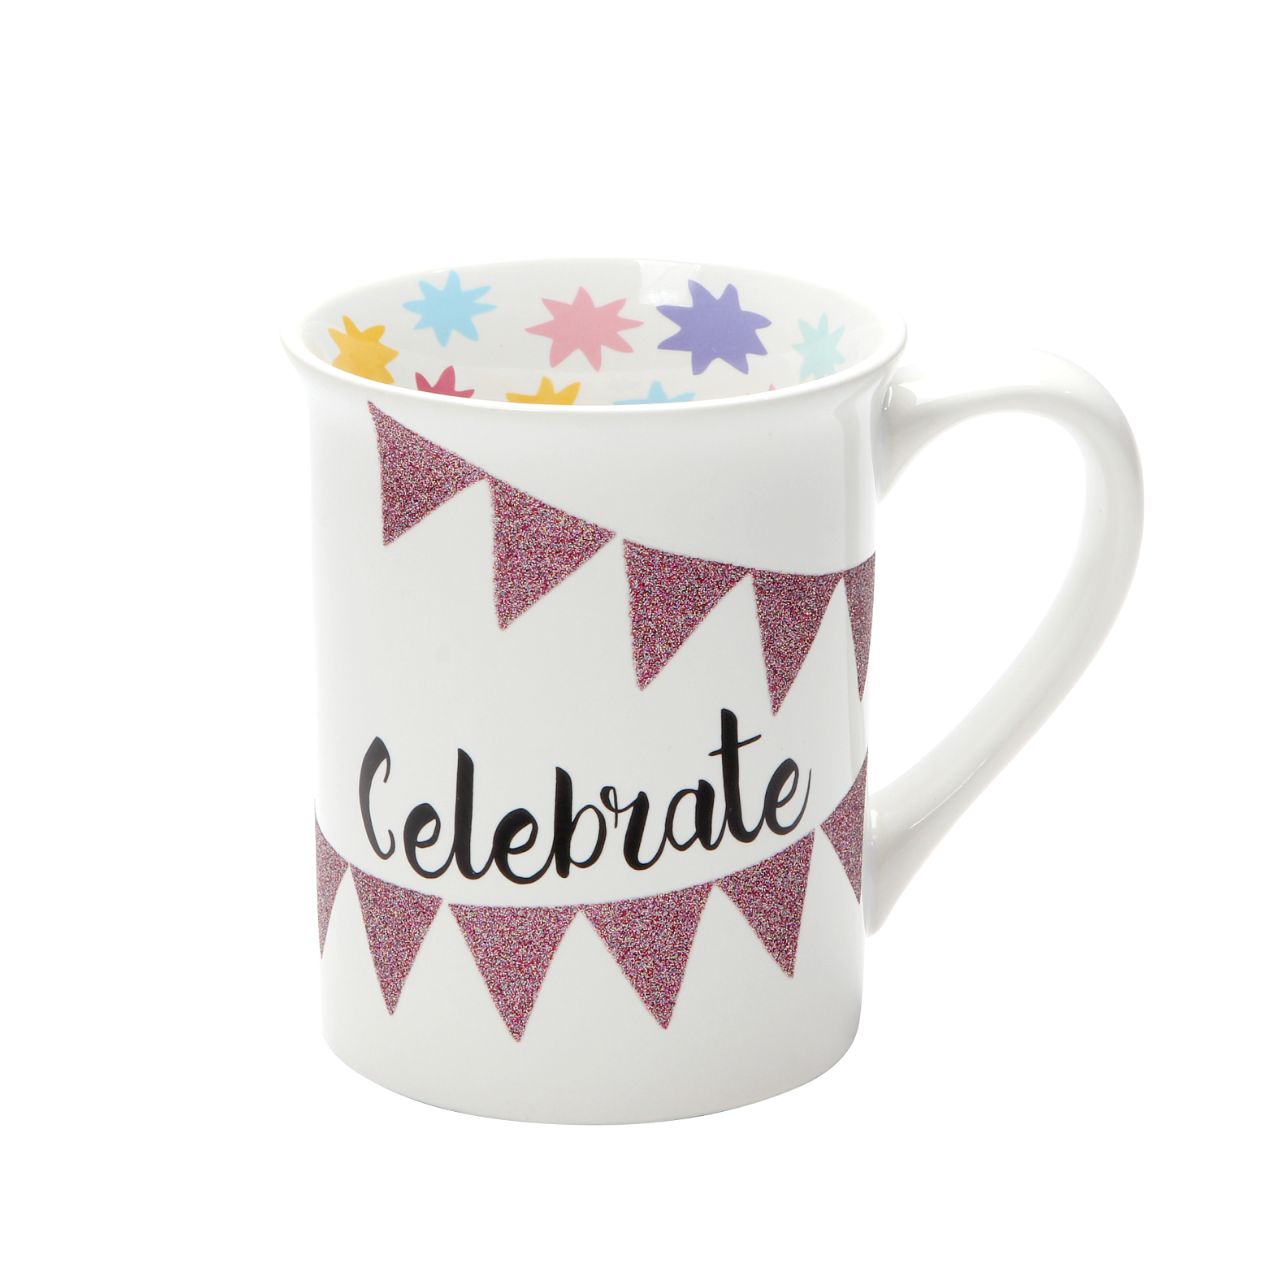 MUD Celebrate Glitter Mug  Every good celebration needs a little sparkle. Whether it's a birthday, a baby shower, a wedding, or just a really good Thursday, add some glitter with our Celebrate mug to liven up anything worth celebrating. Party on and sparkle on. Messaging reads: "Celebrate," "Glitter is my favourite colour." 